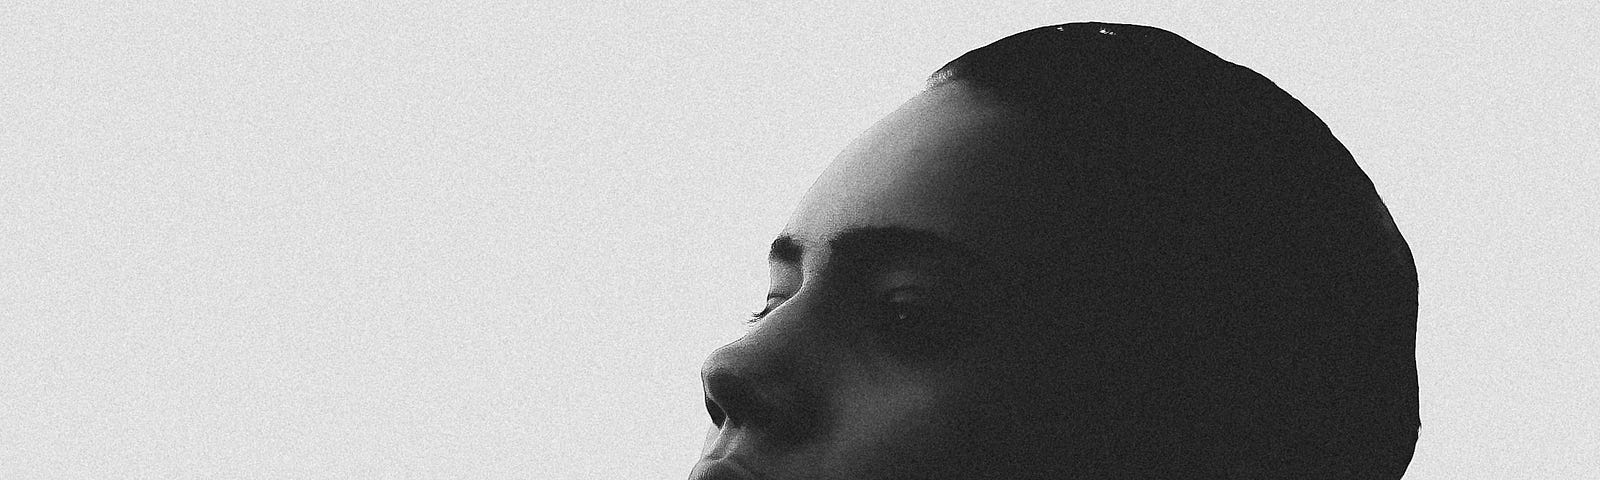 black and white picture, zoomed in on a woman’s head looking into distance.